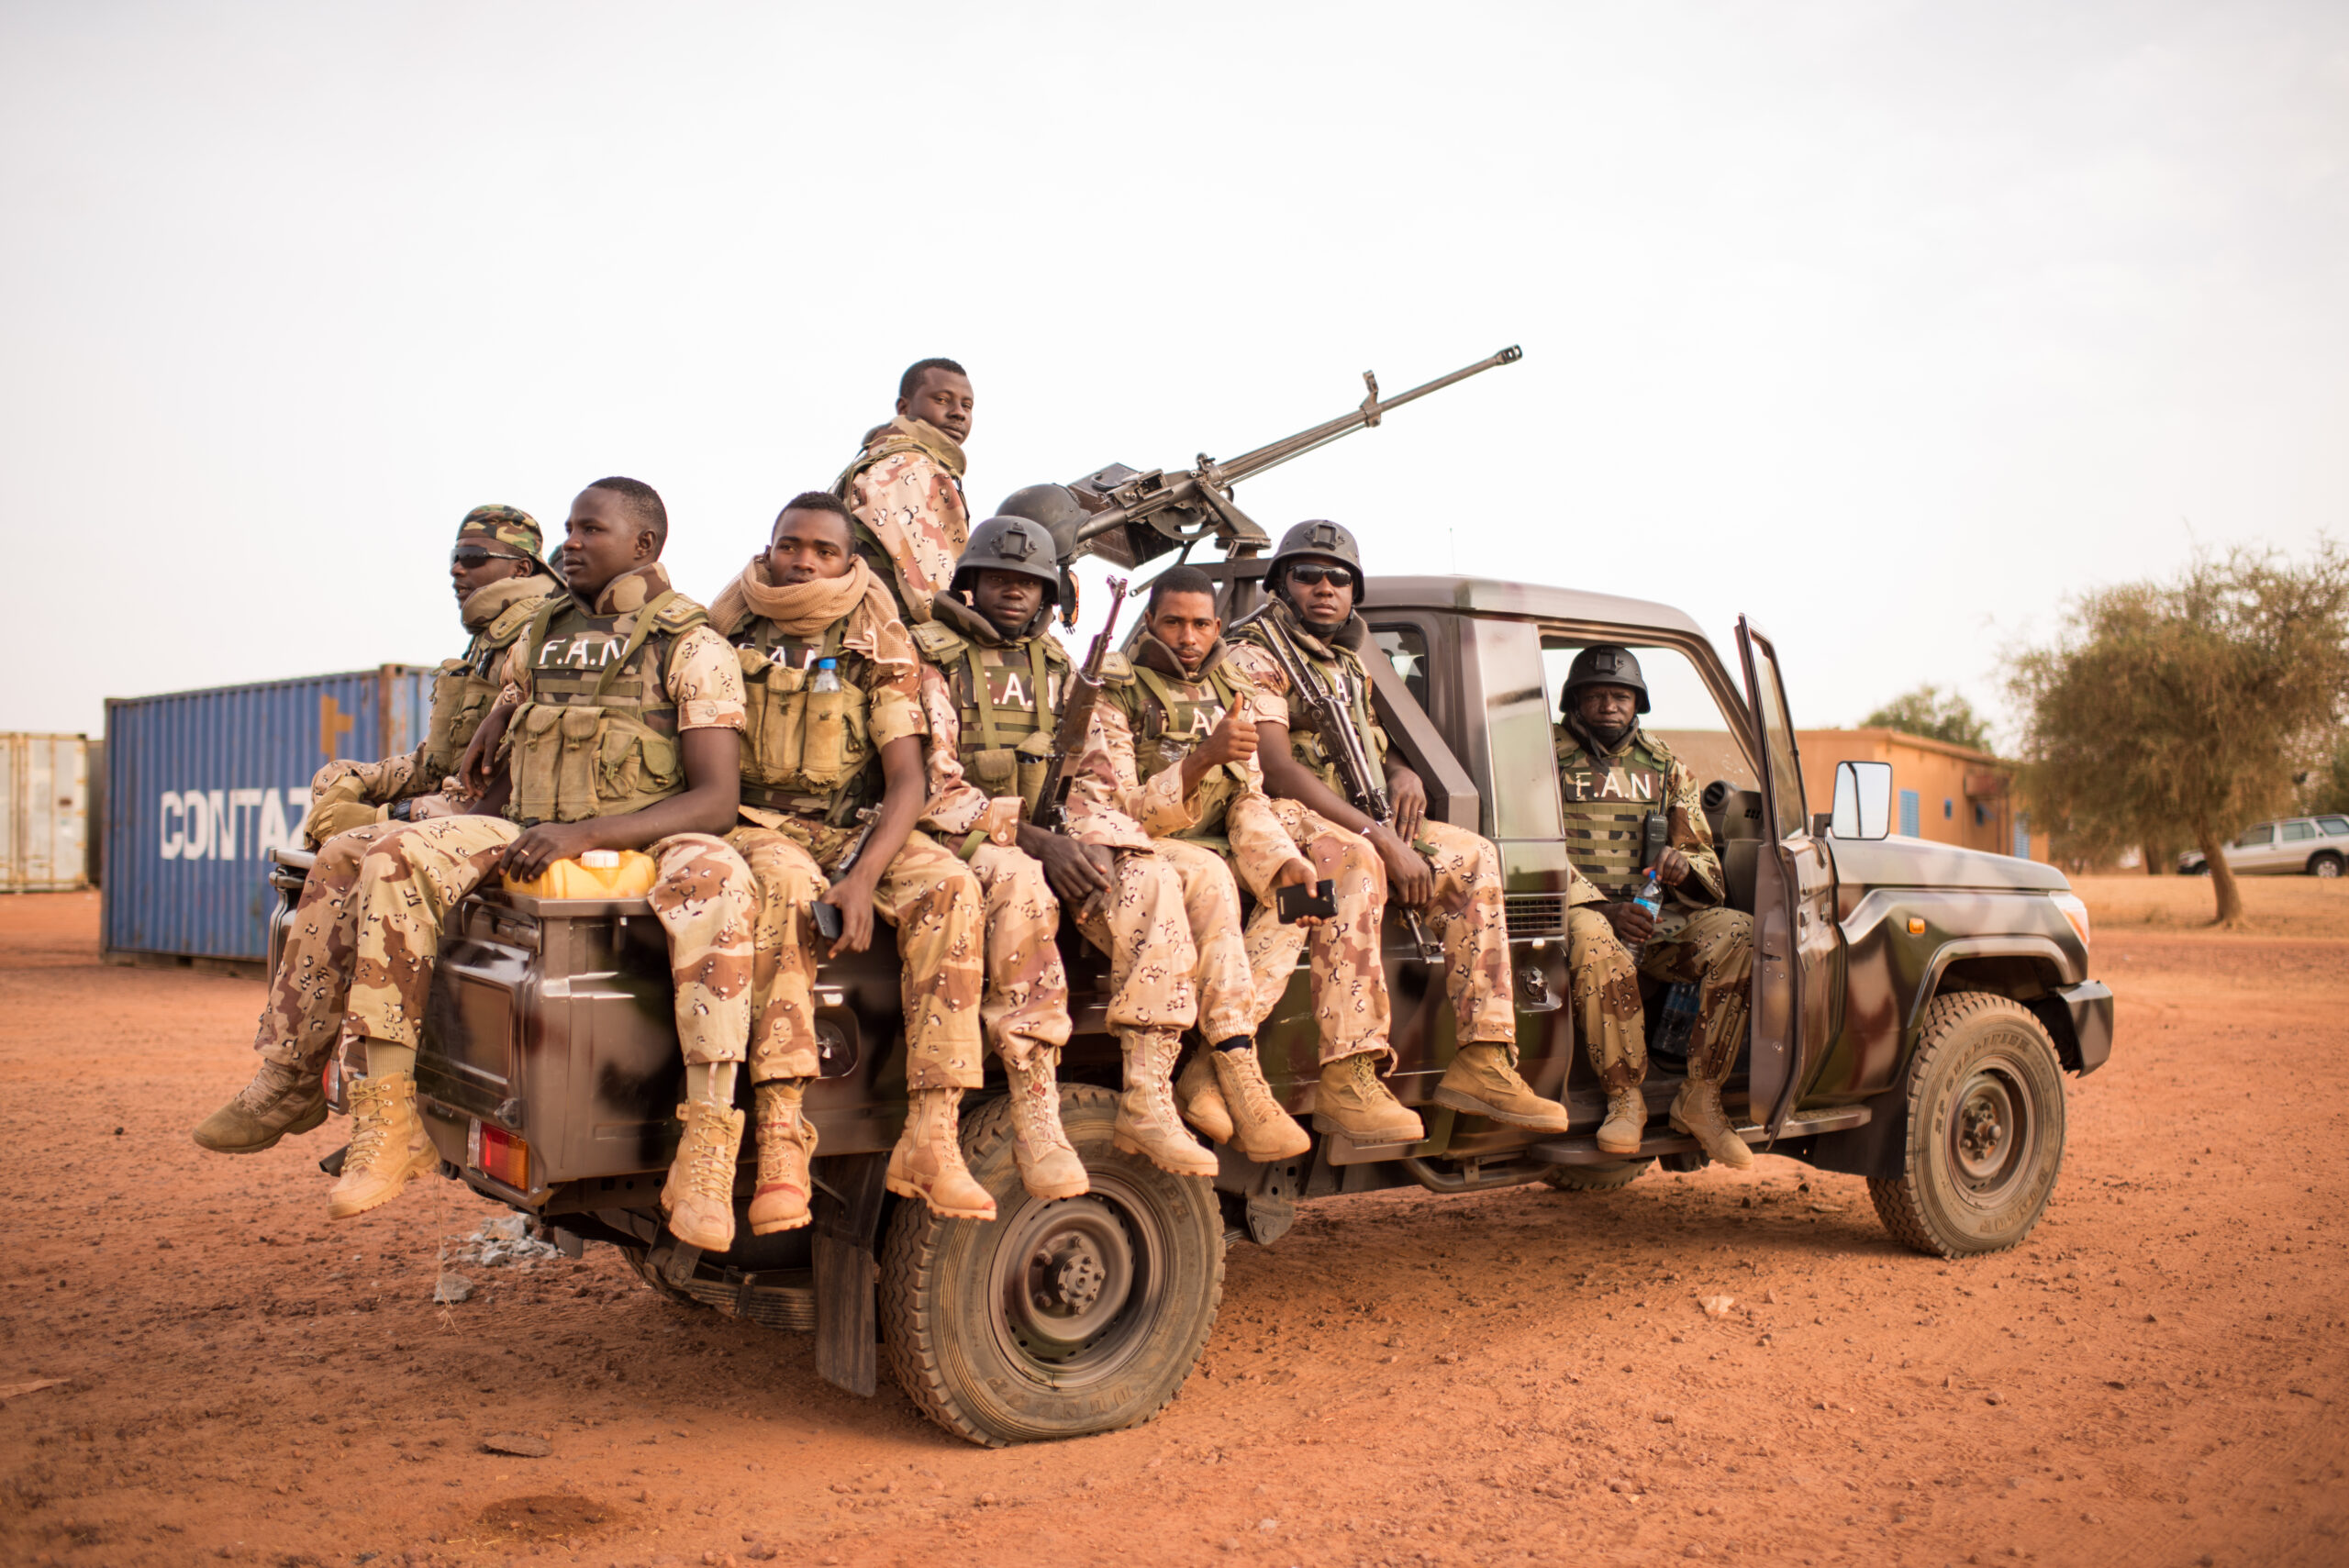 Misapprehensions are blocking a resolution in Niger